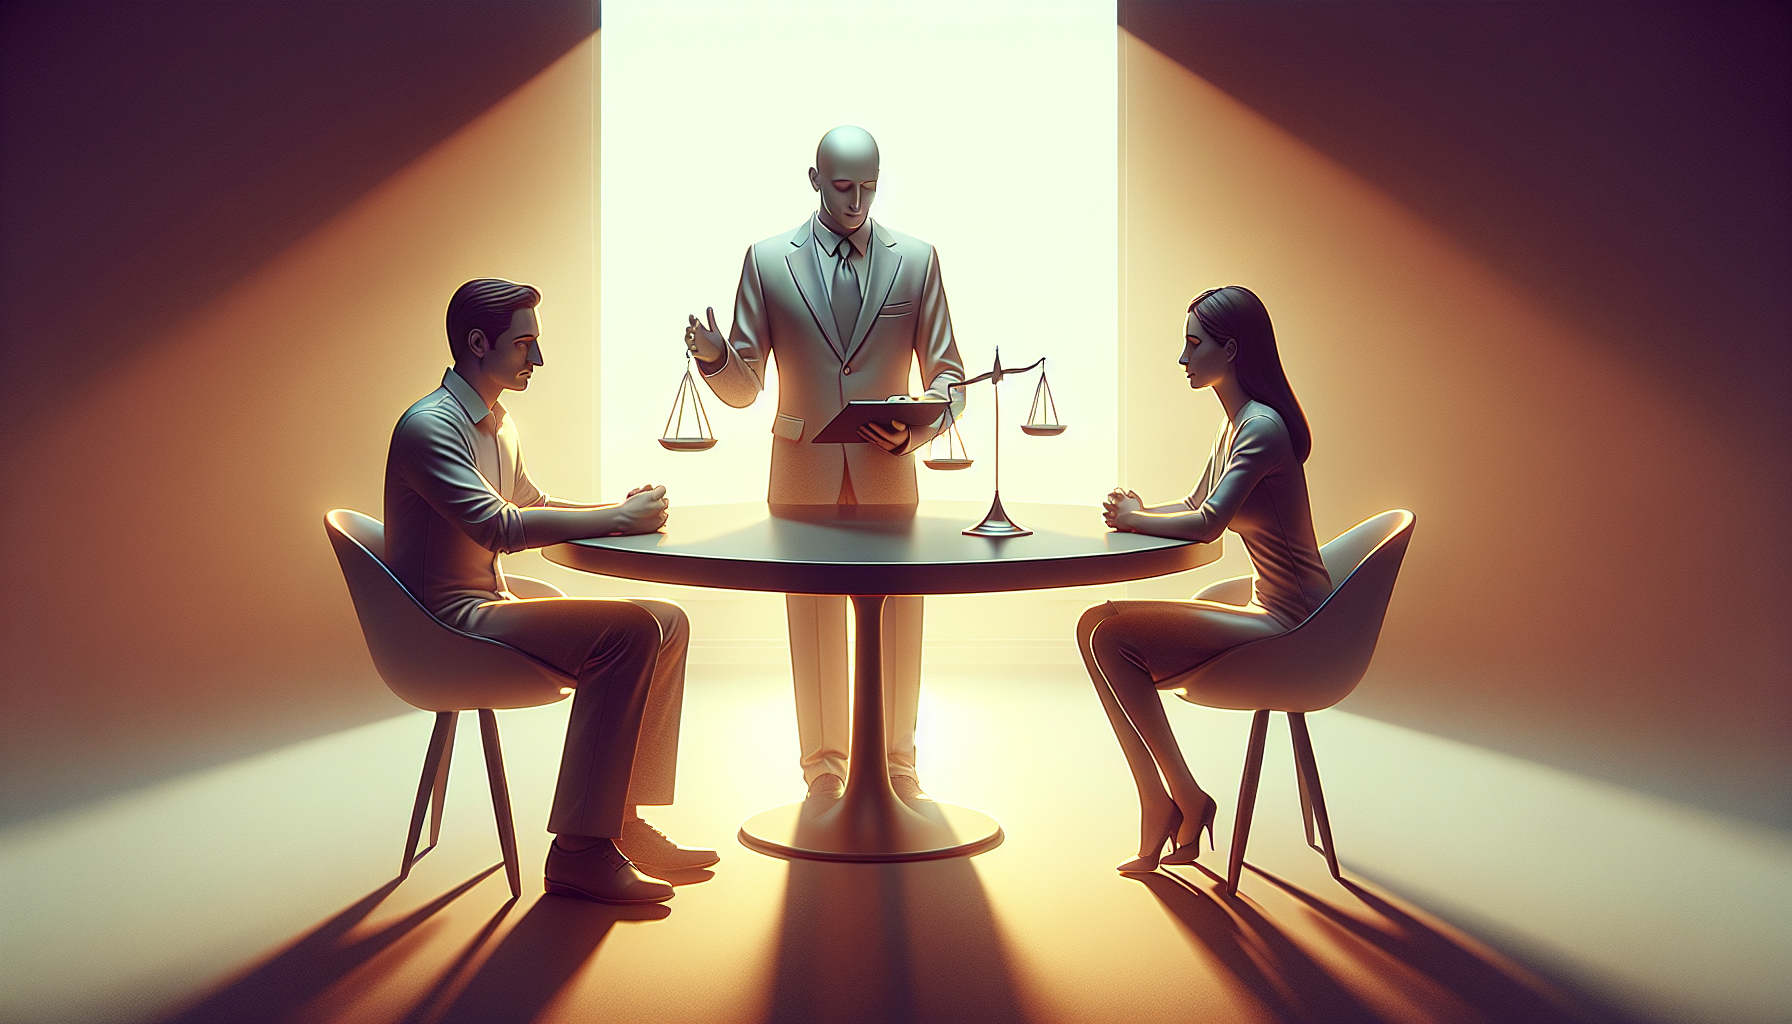 Illustration of a couple in a cooperative discussion with a mediator, symbolizing divorce mediation